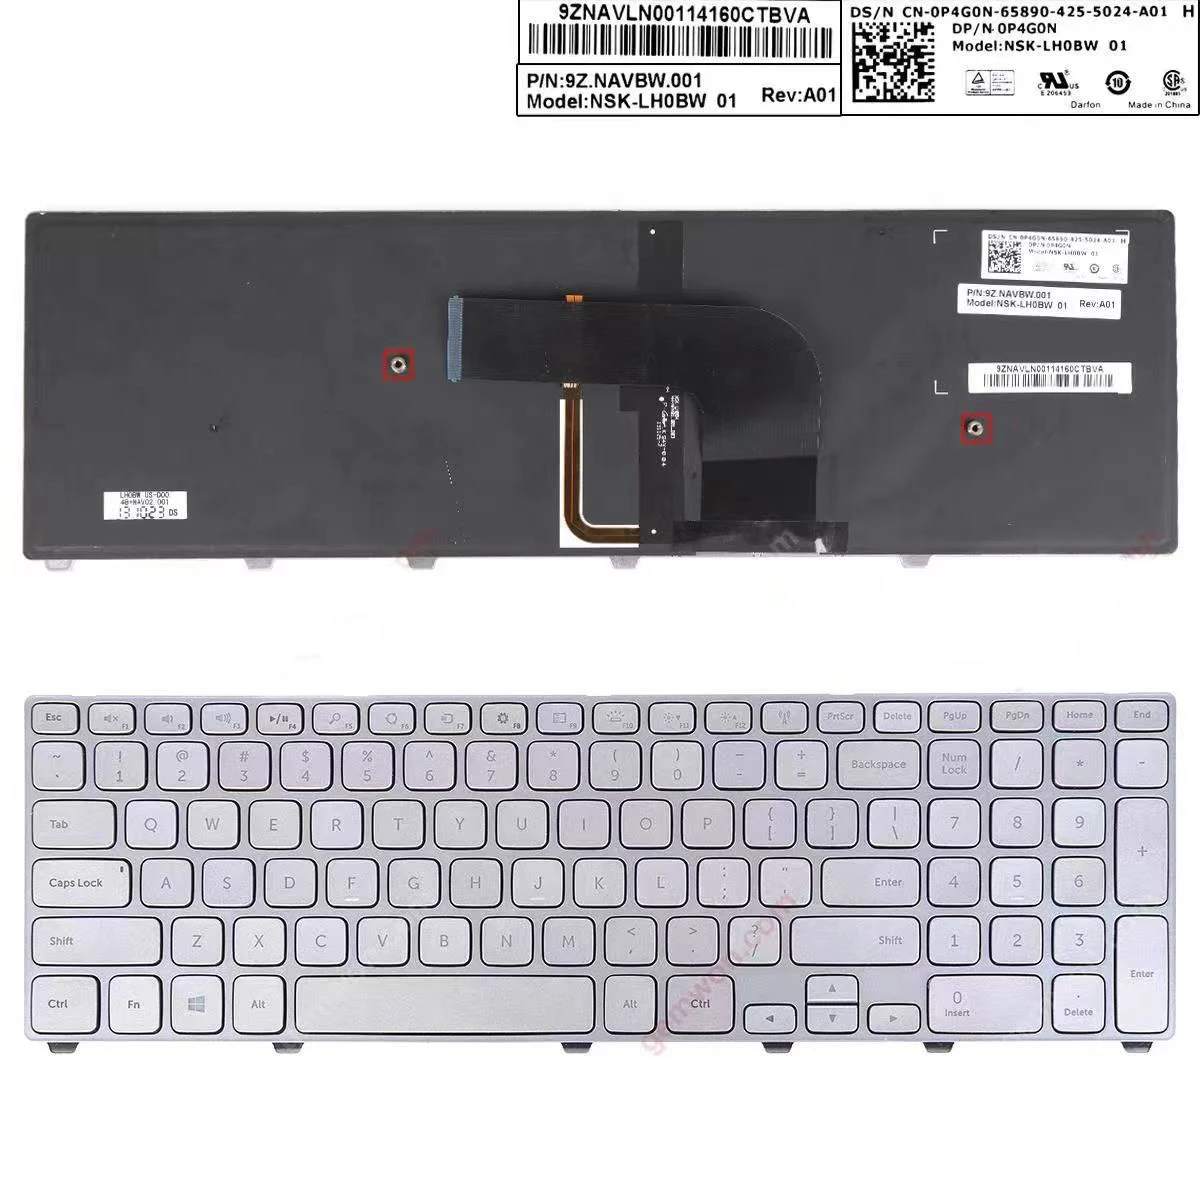 

New English US Keyboard For Dell Inspiron 17-7000 17-7737 17 7000 7746 7737 With Backlit Silver